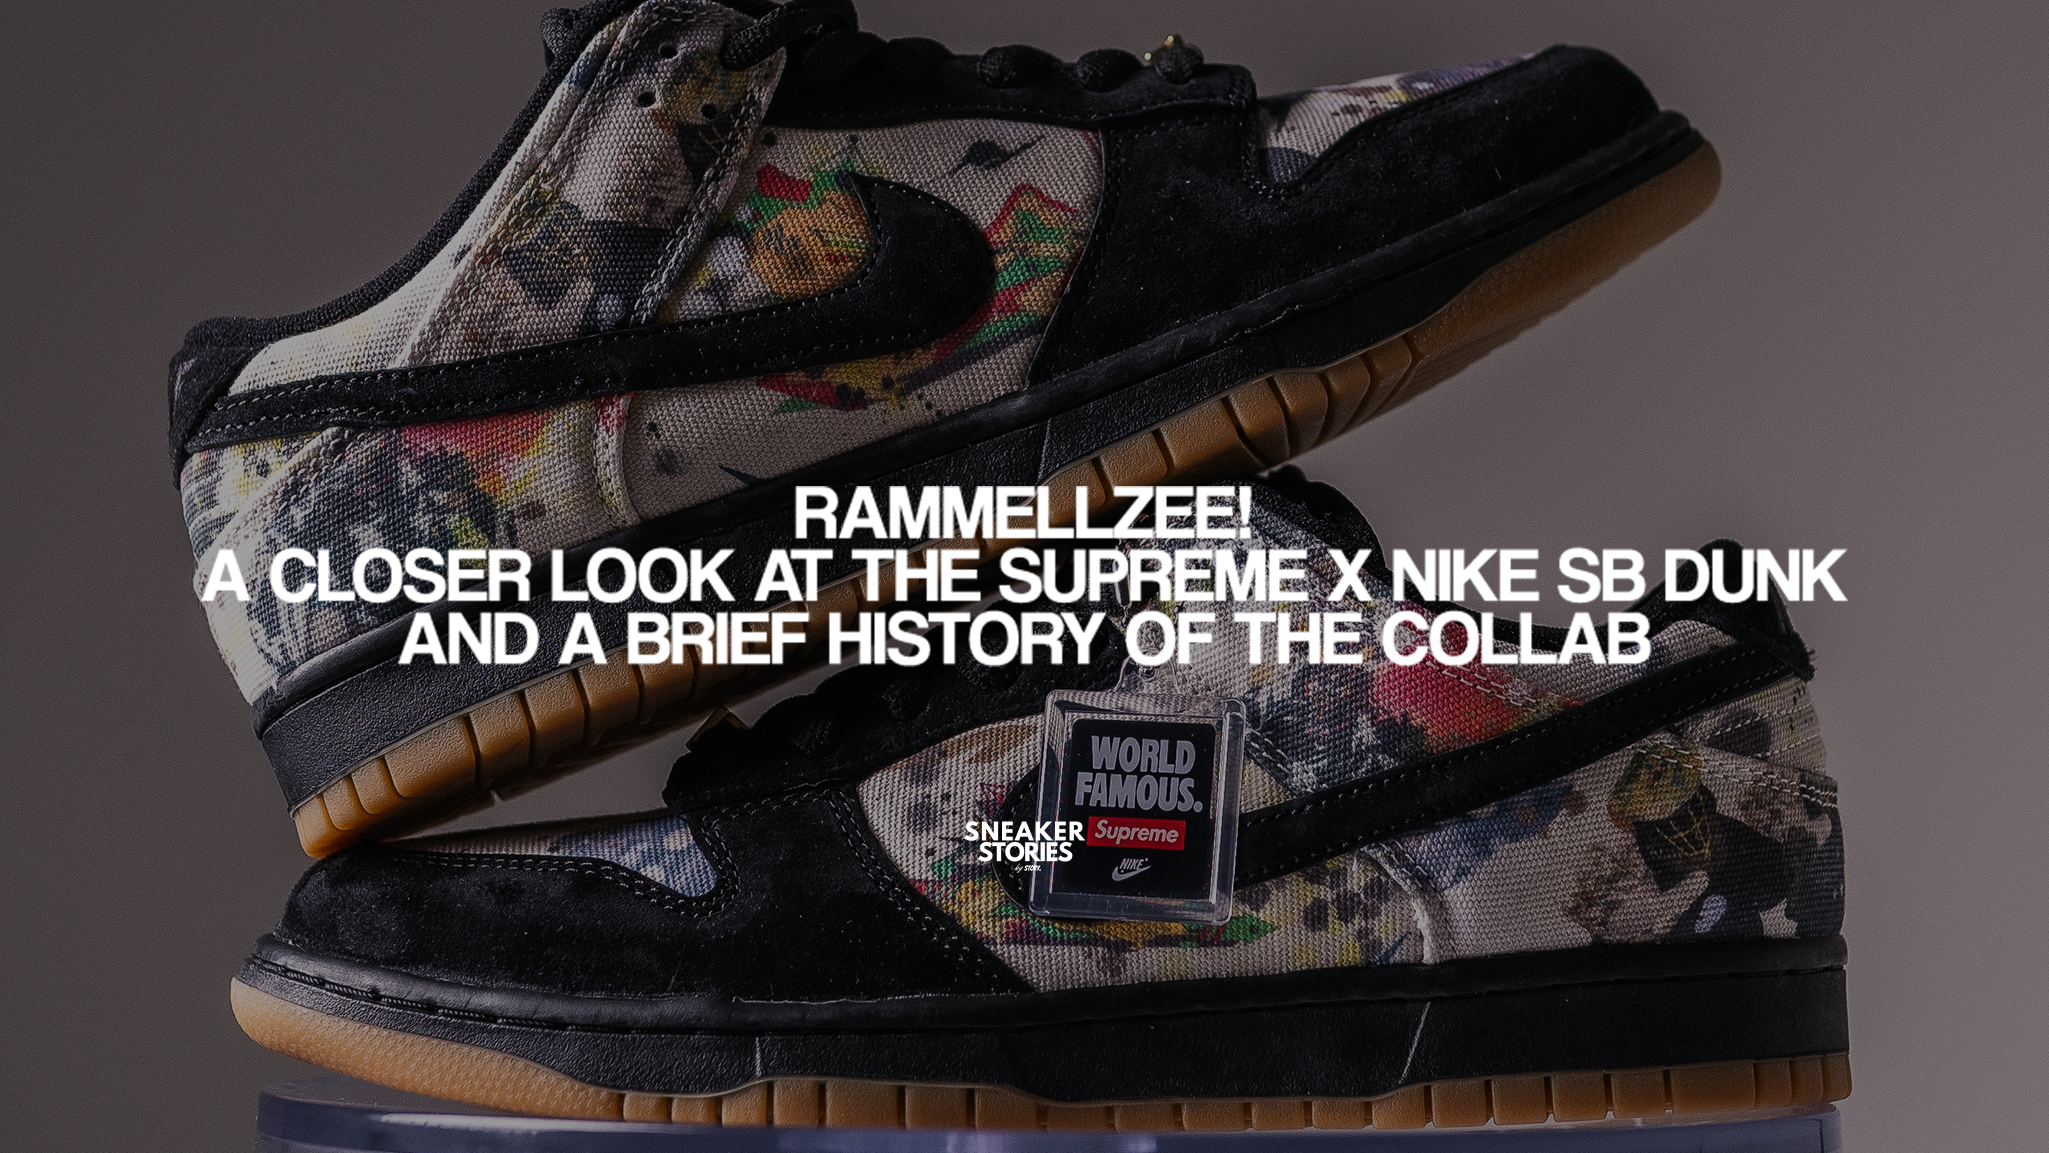 Rammellzee! A closer look at the Supreme x Nike SB dunk and a